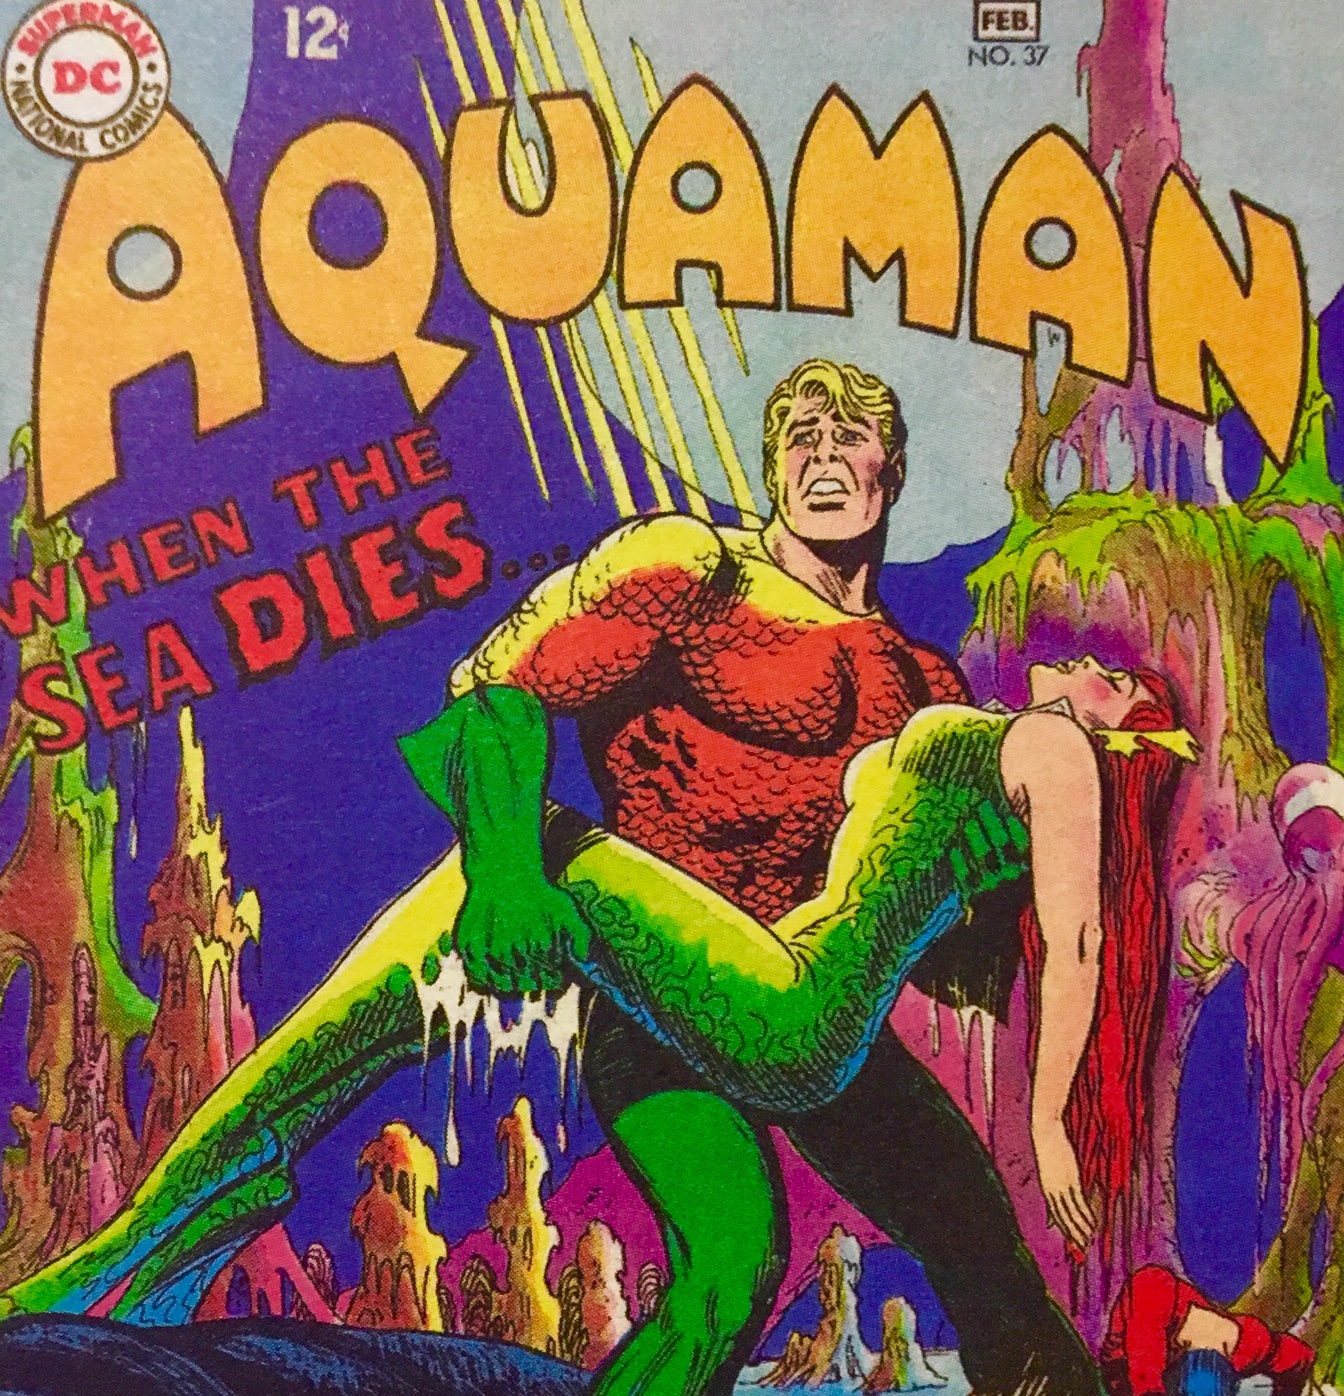 “When the Sea Dies!” Can Aquaman save our Oceans?!